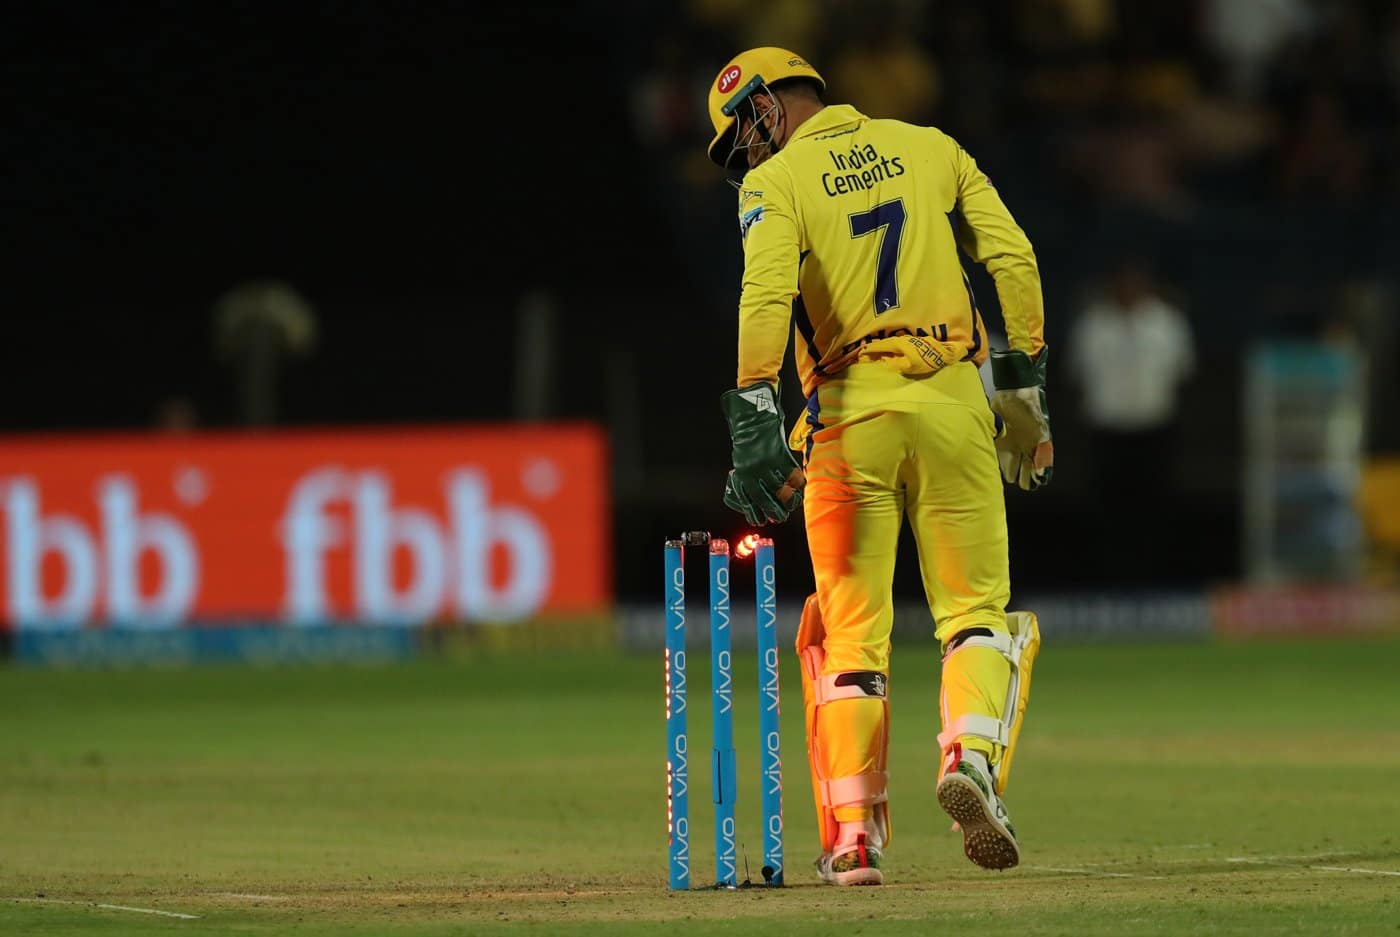 Dhoni is regarded as the best keepers played in the IPL ever (x.com)